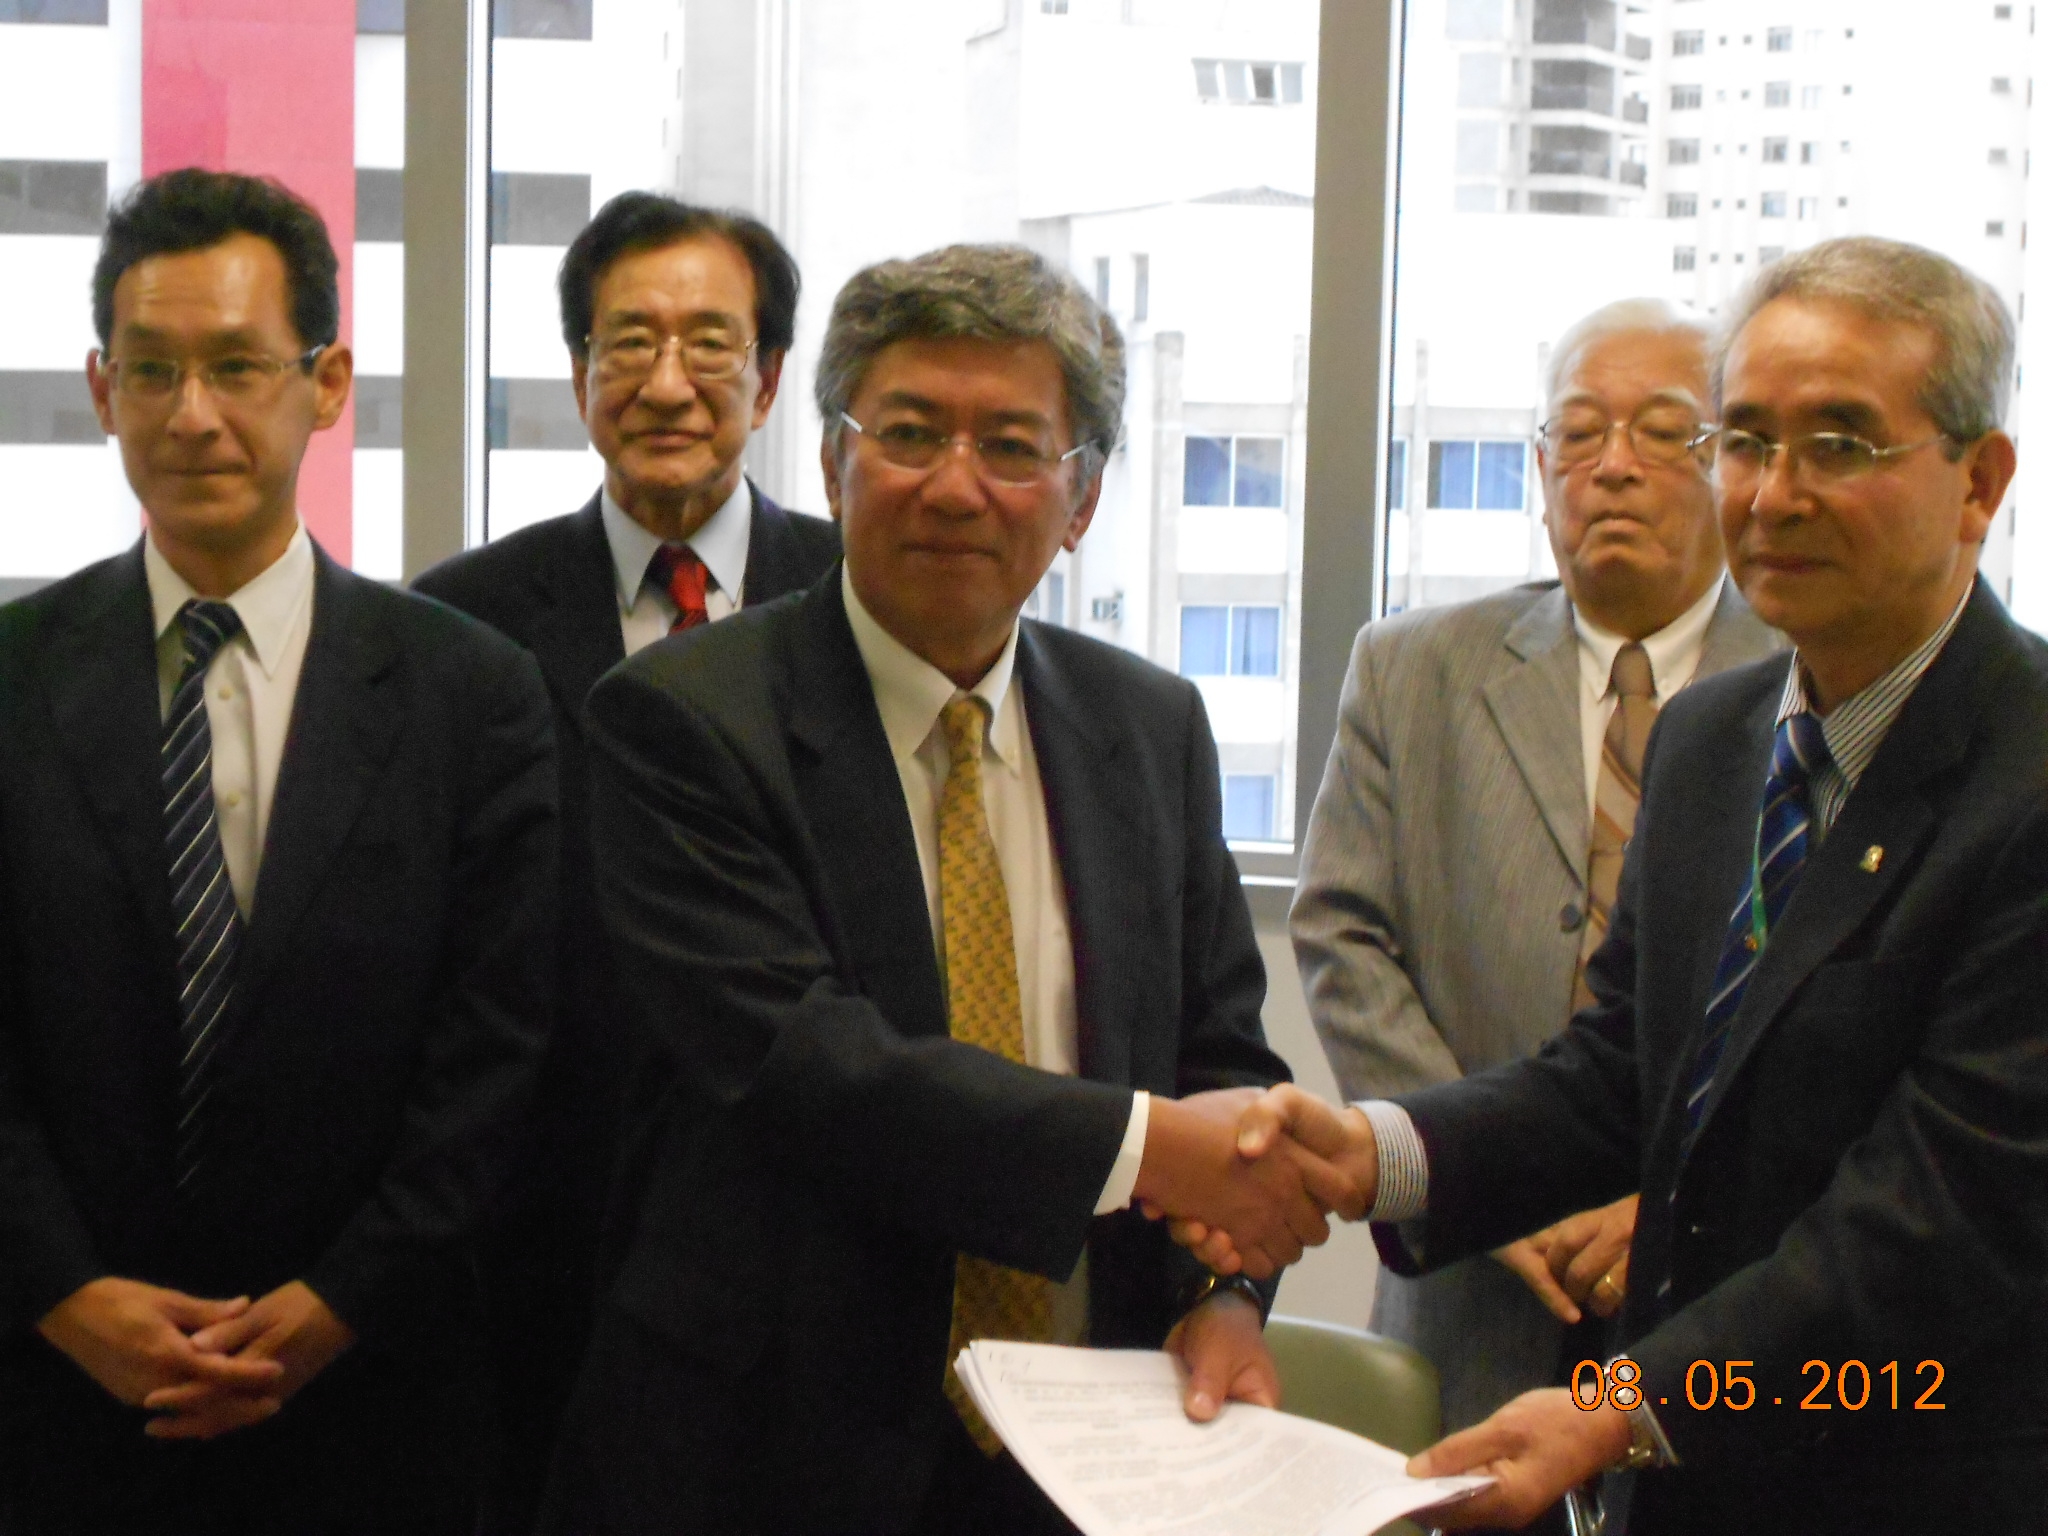 The Mitsui Bussan do Brasil Foundation support the 